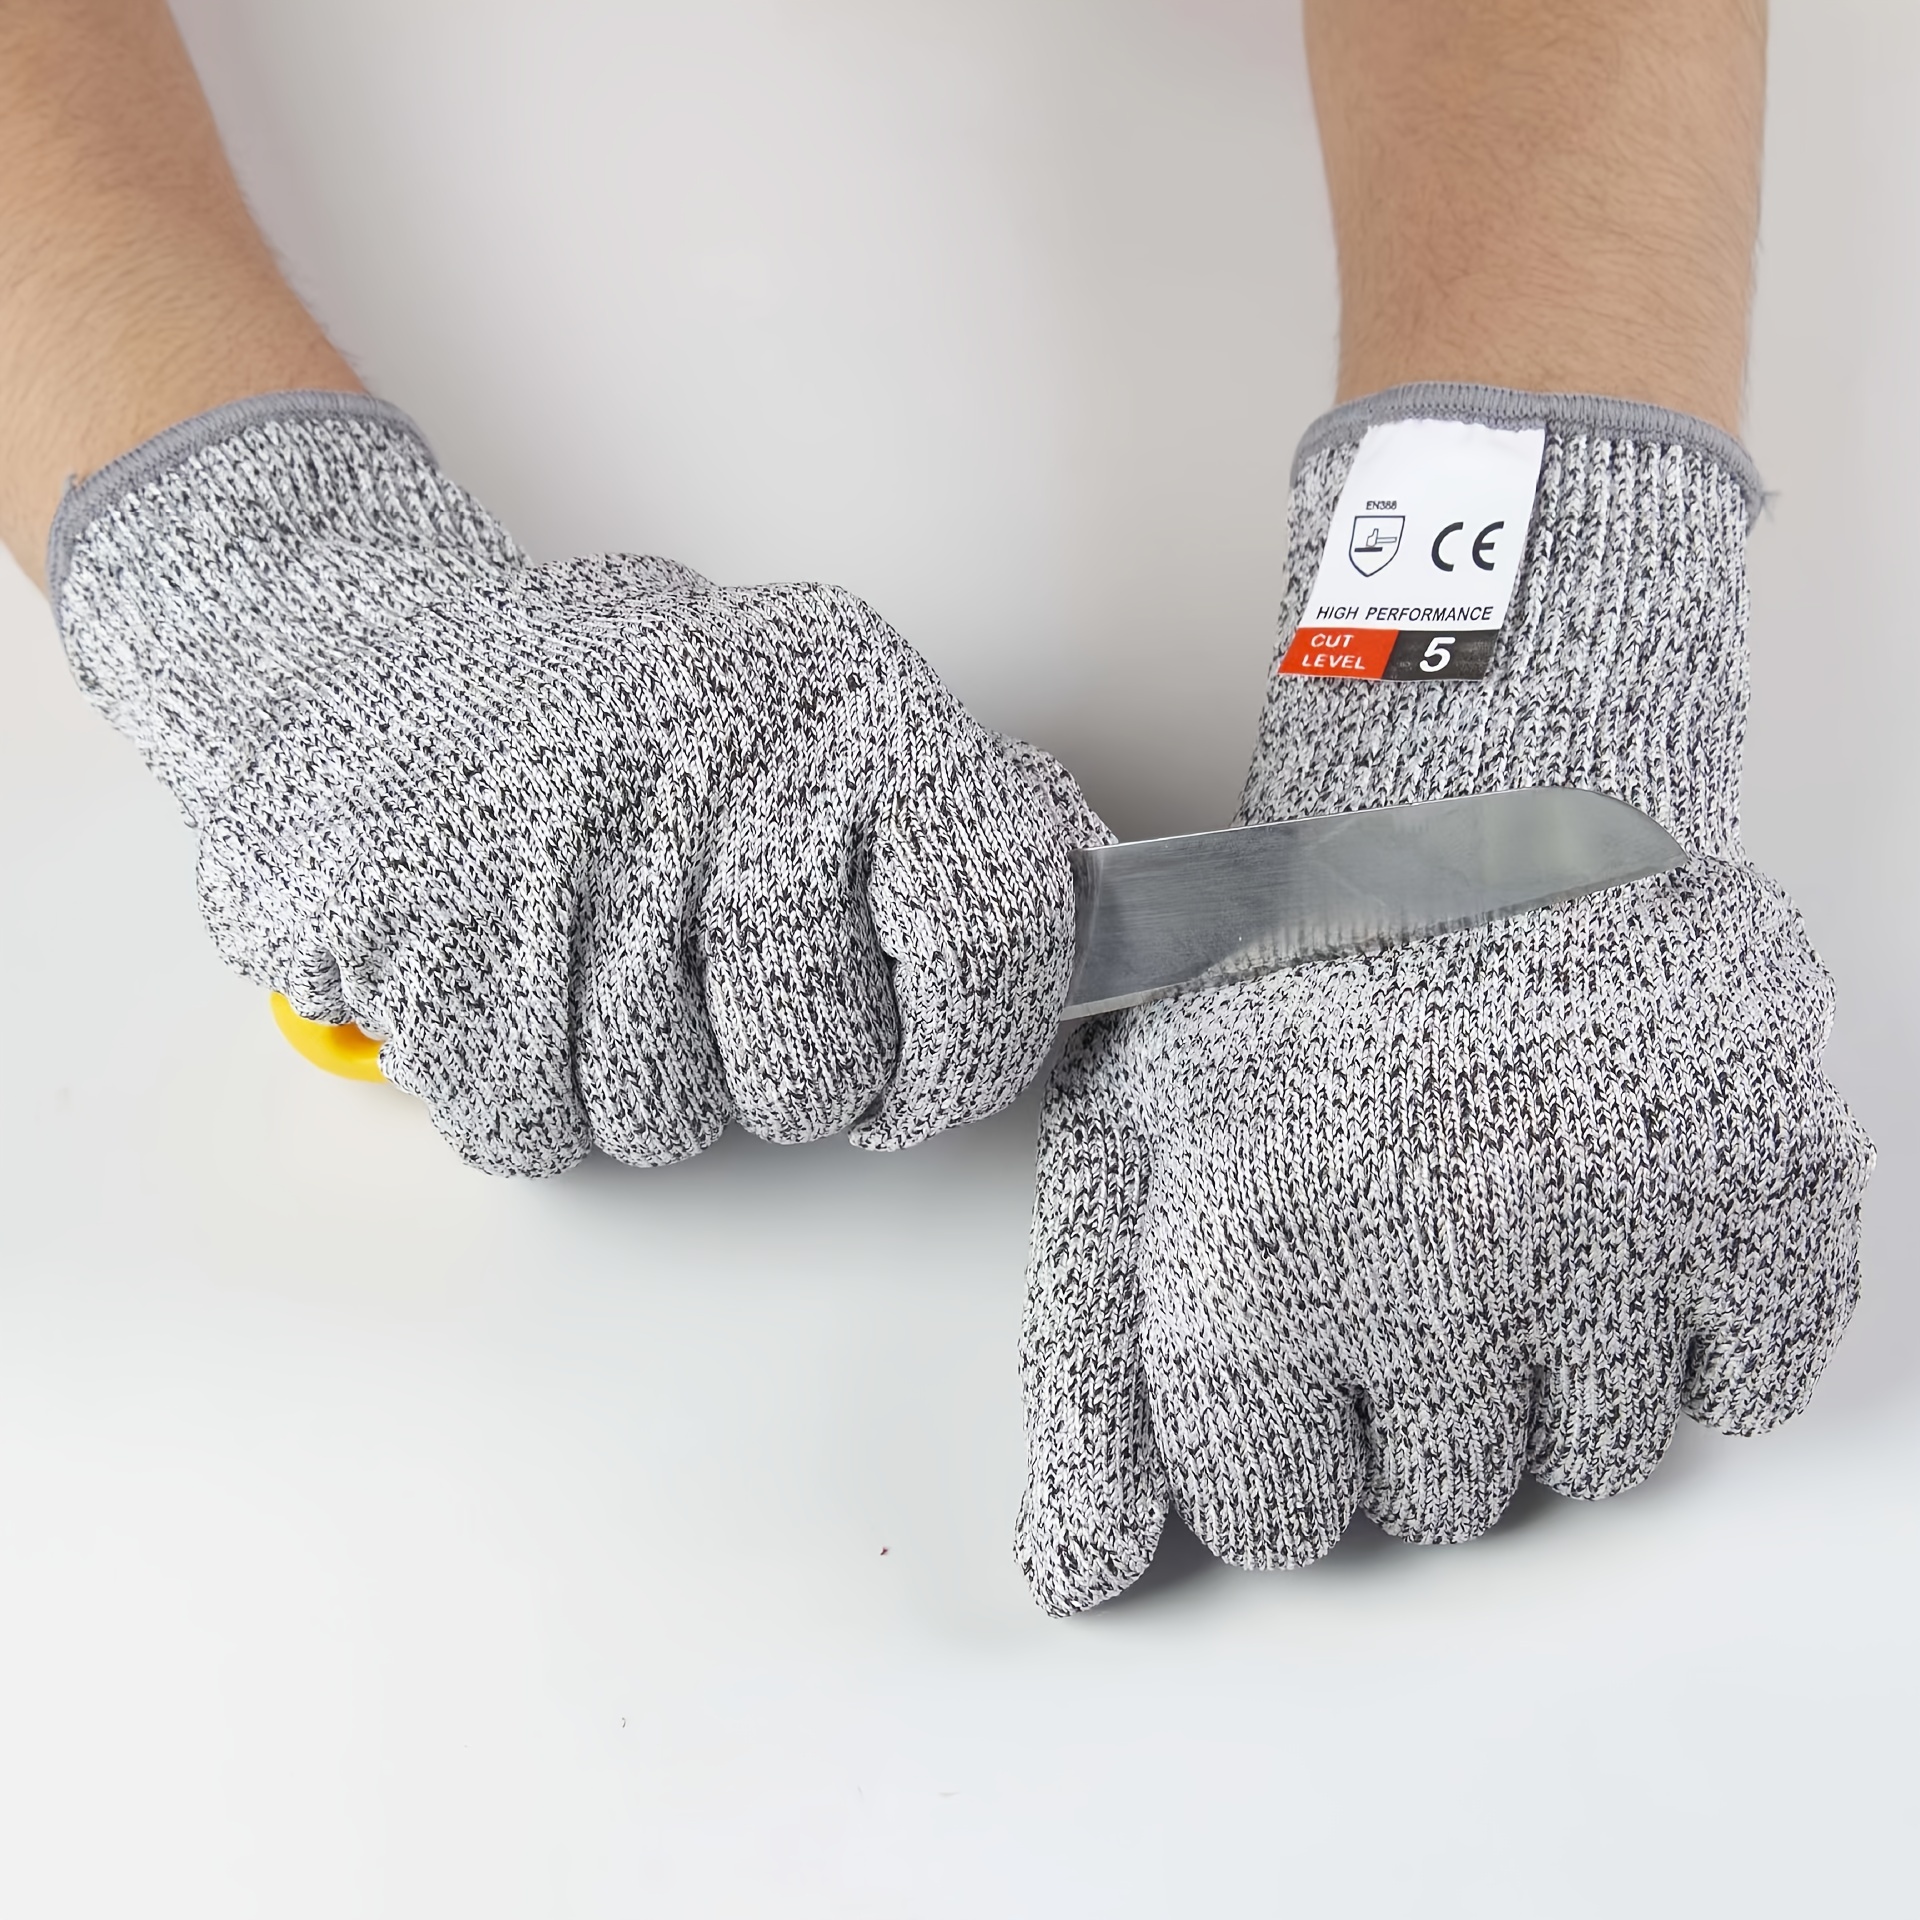 Cut Resistant Gloves Food Grade Level 5 Protection, Safety Kitchen Cuts  Gloves for Oyster Shucking, Fish Fillet Processing, Mandolin Slicing, Meat